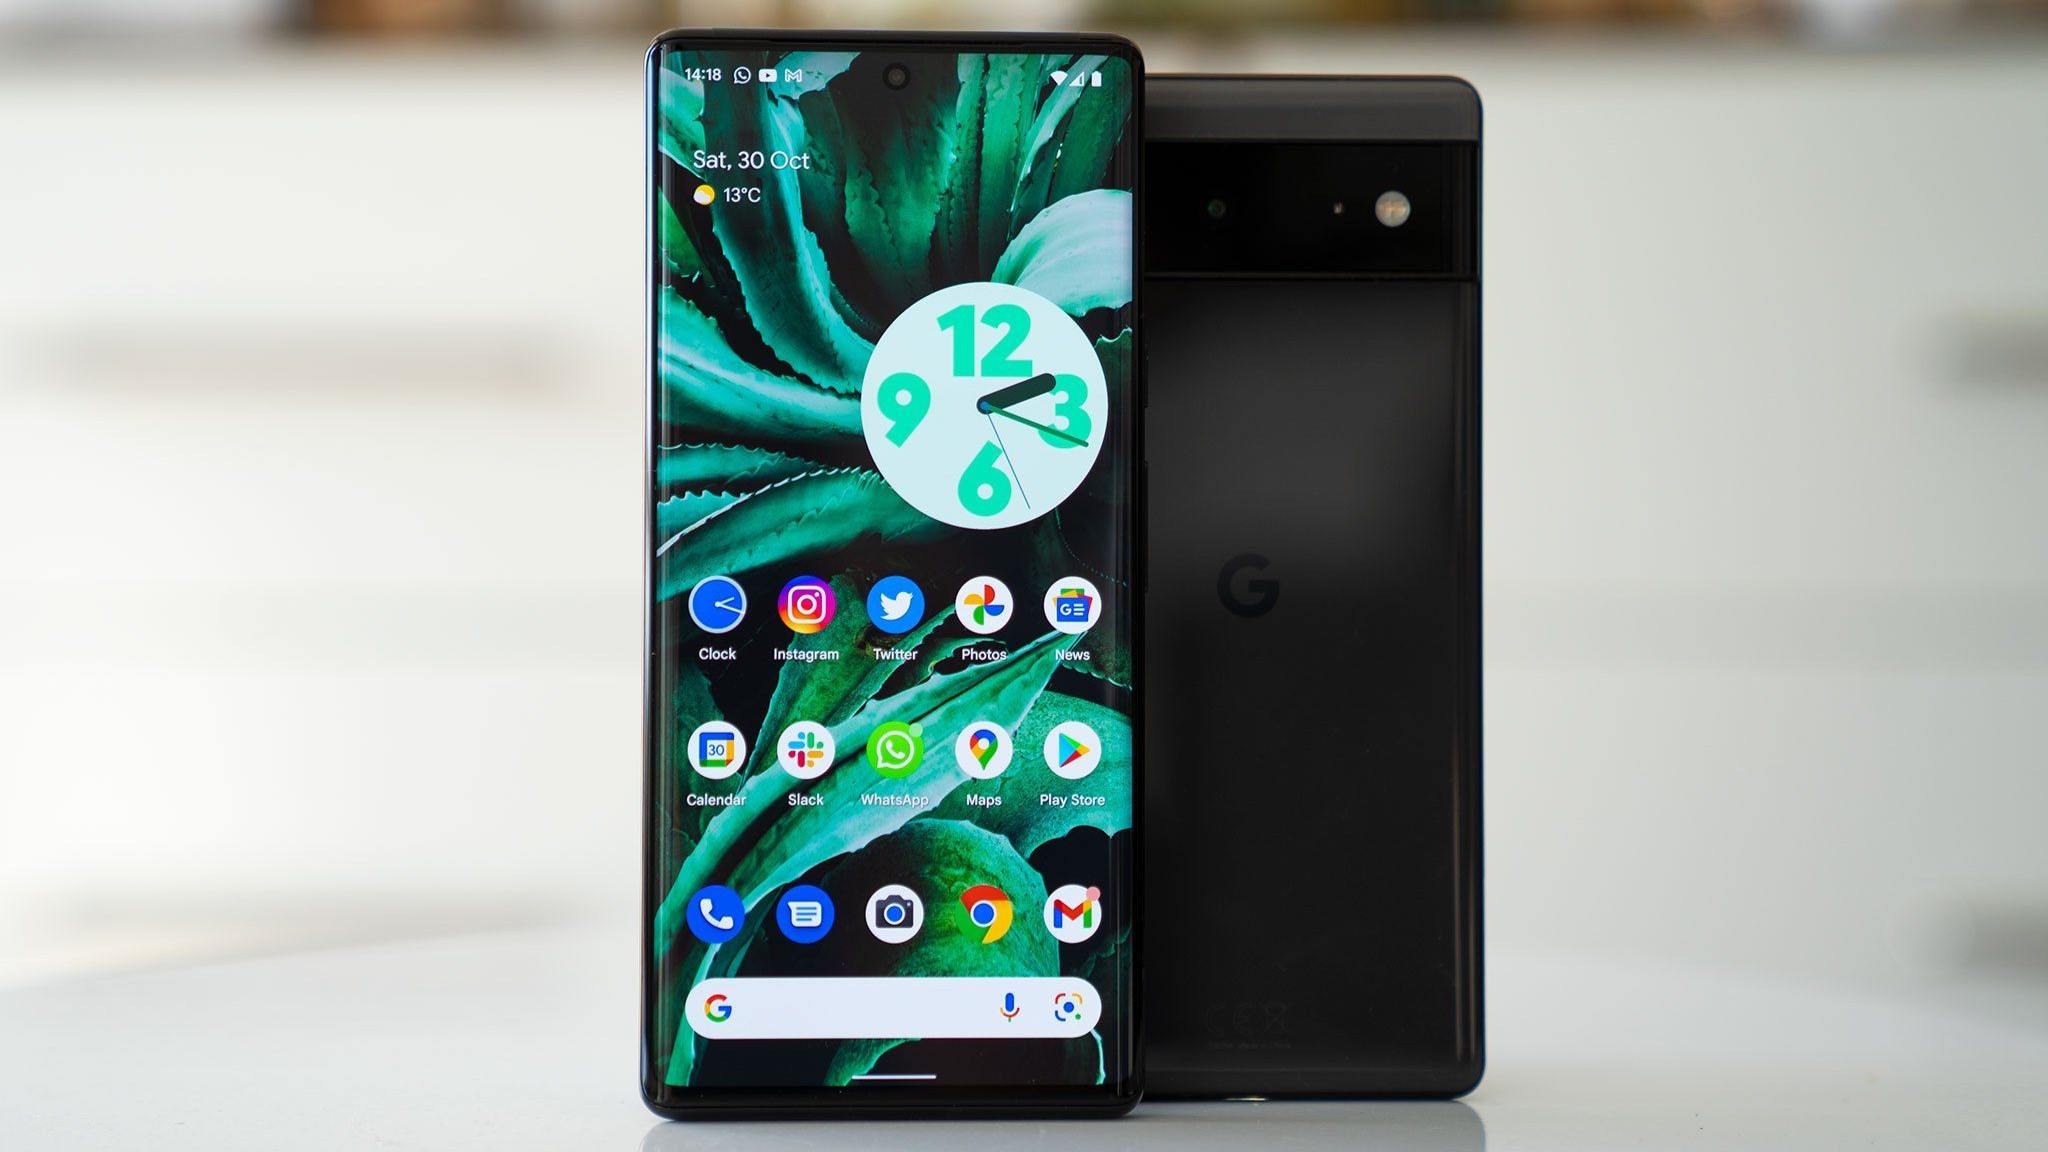 Google Pixel 6 Pro and Google Pixel 6 standing upright on a white table